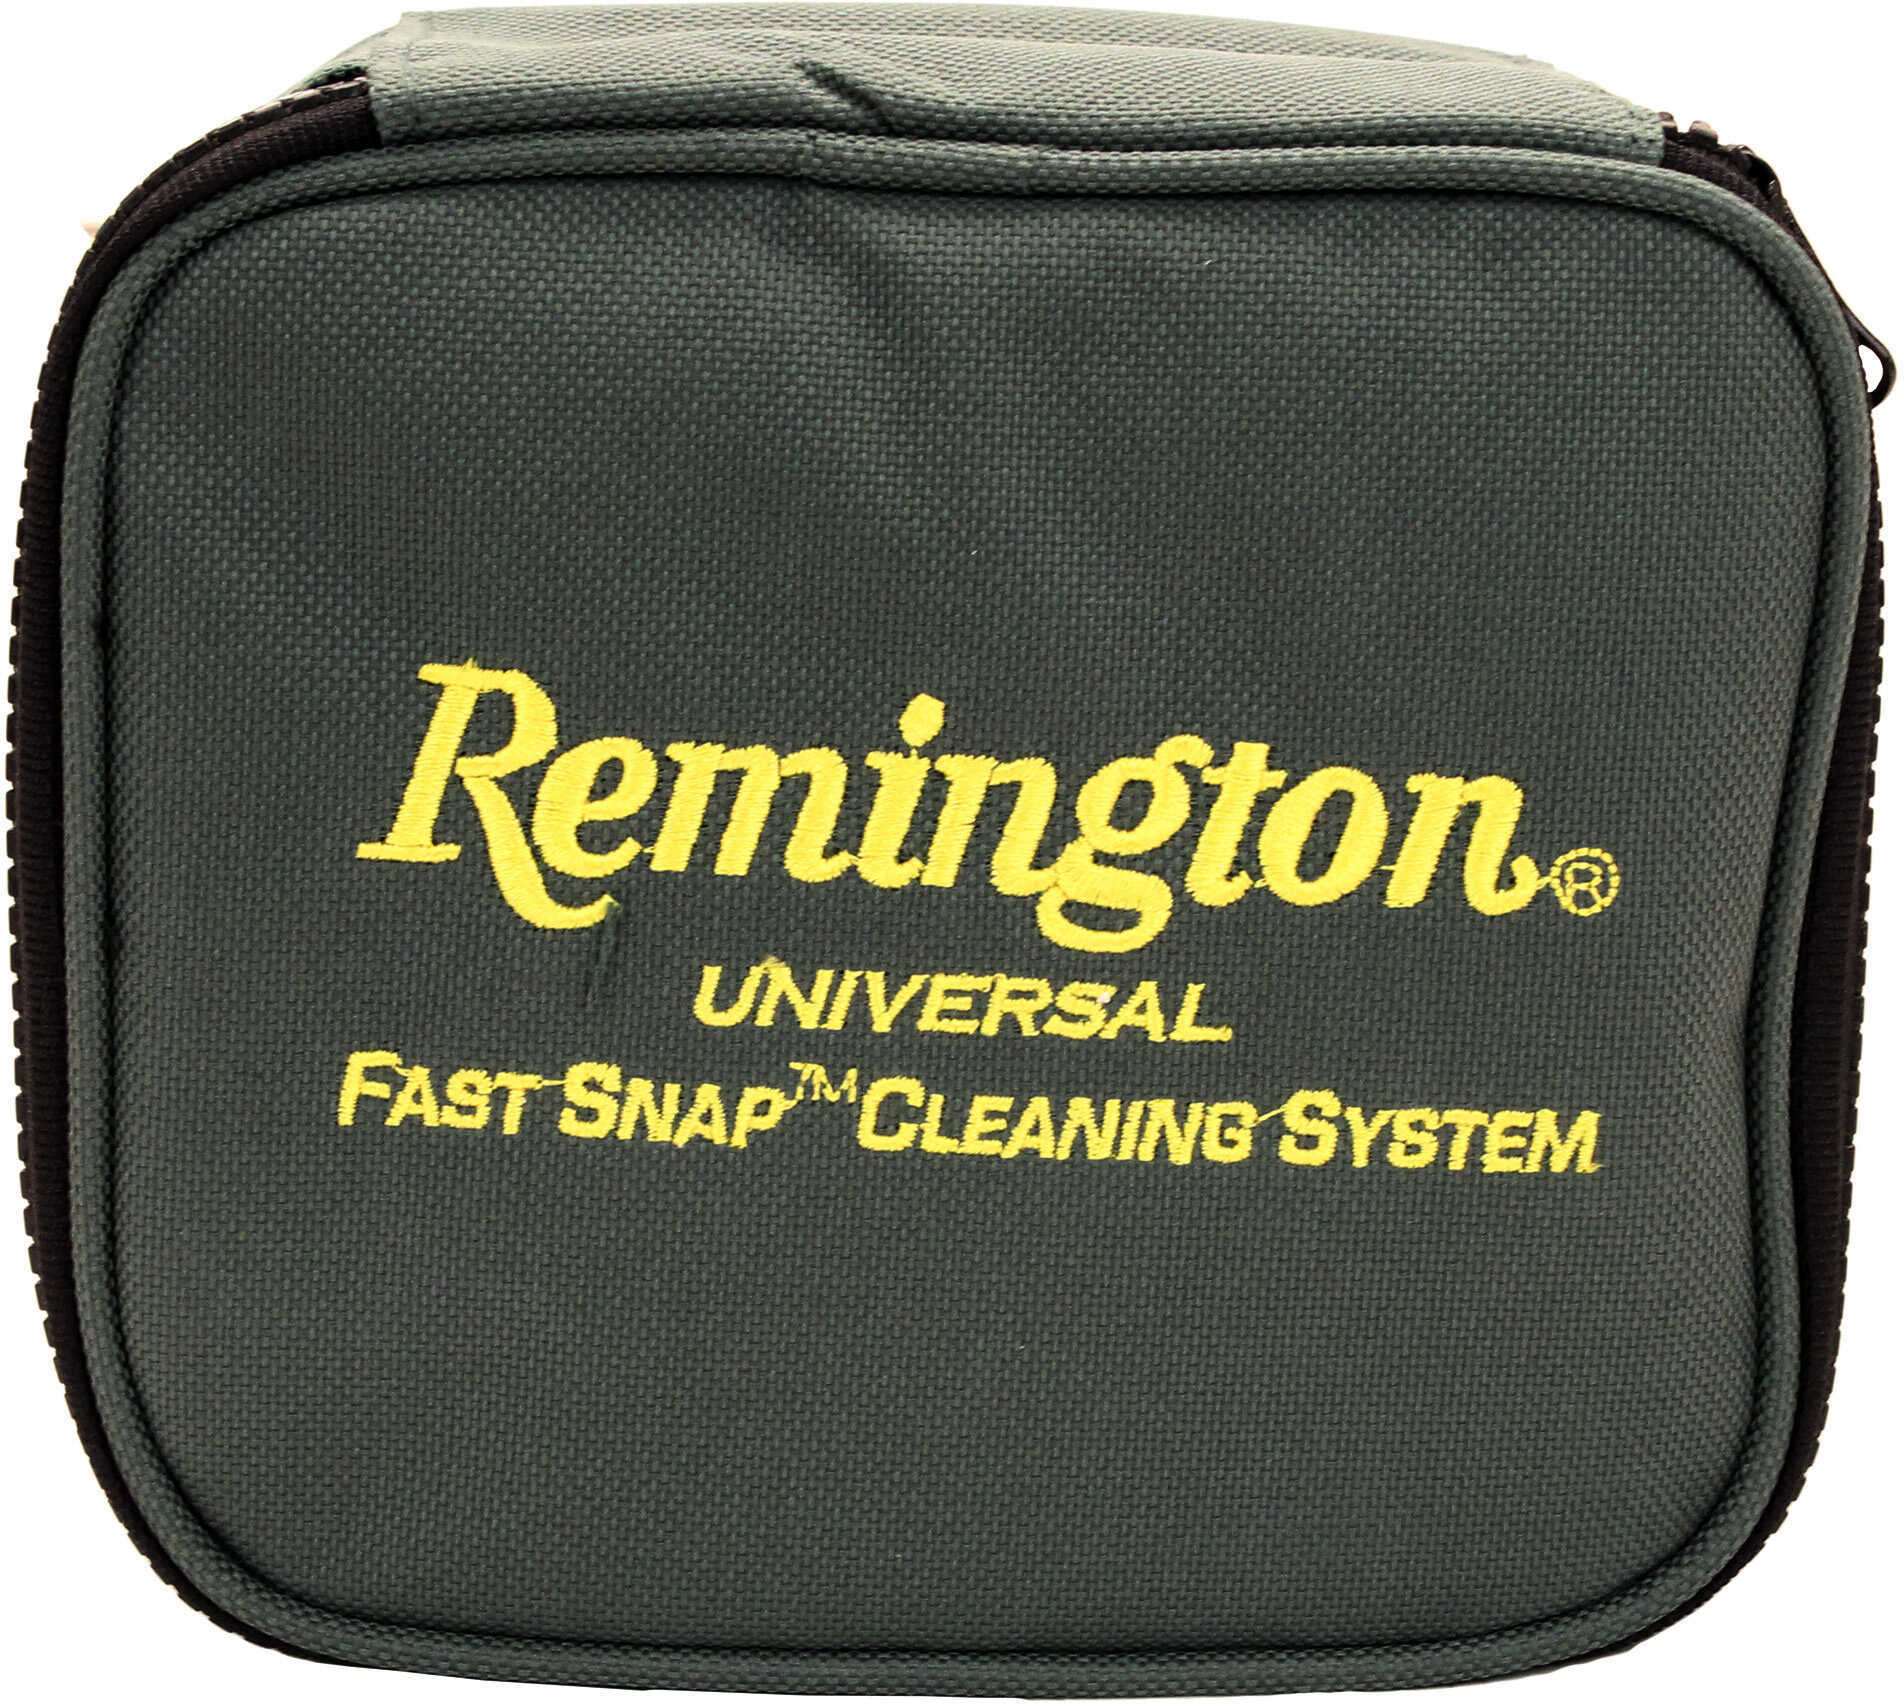 Remington 16364 Fast Snap 2.0 Universal Cleaning Kit 38 Pieces